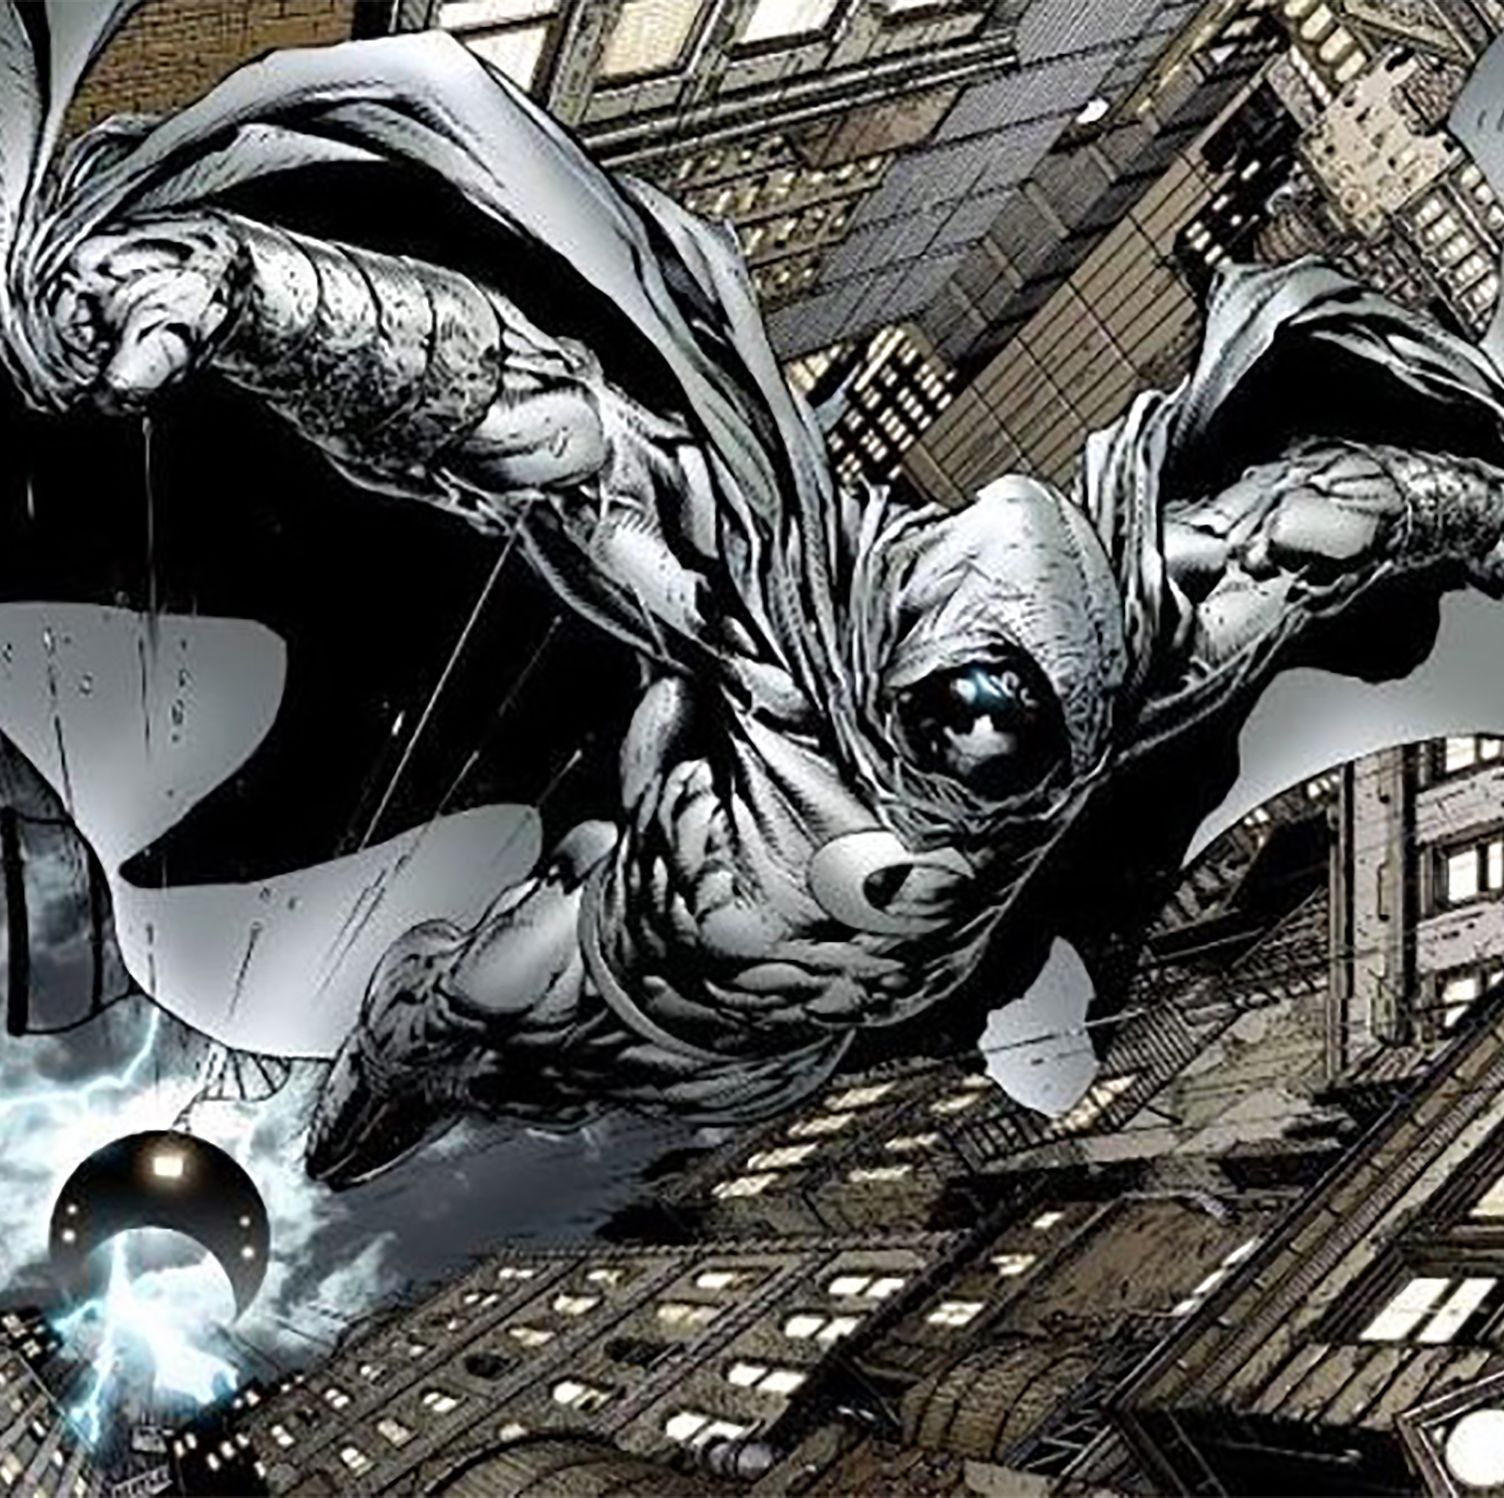 Everything You Need To Know About Marvel's New Superhero 'Moon Knight